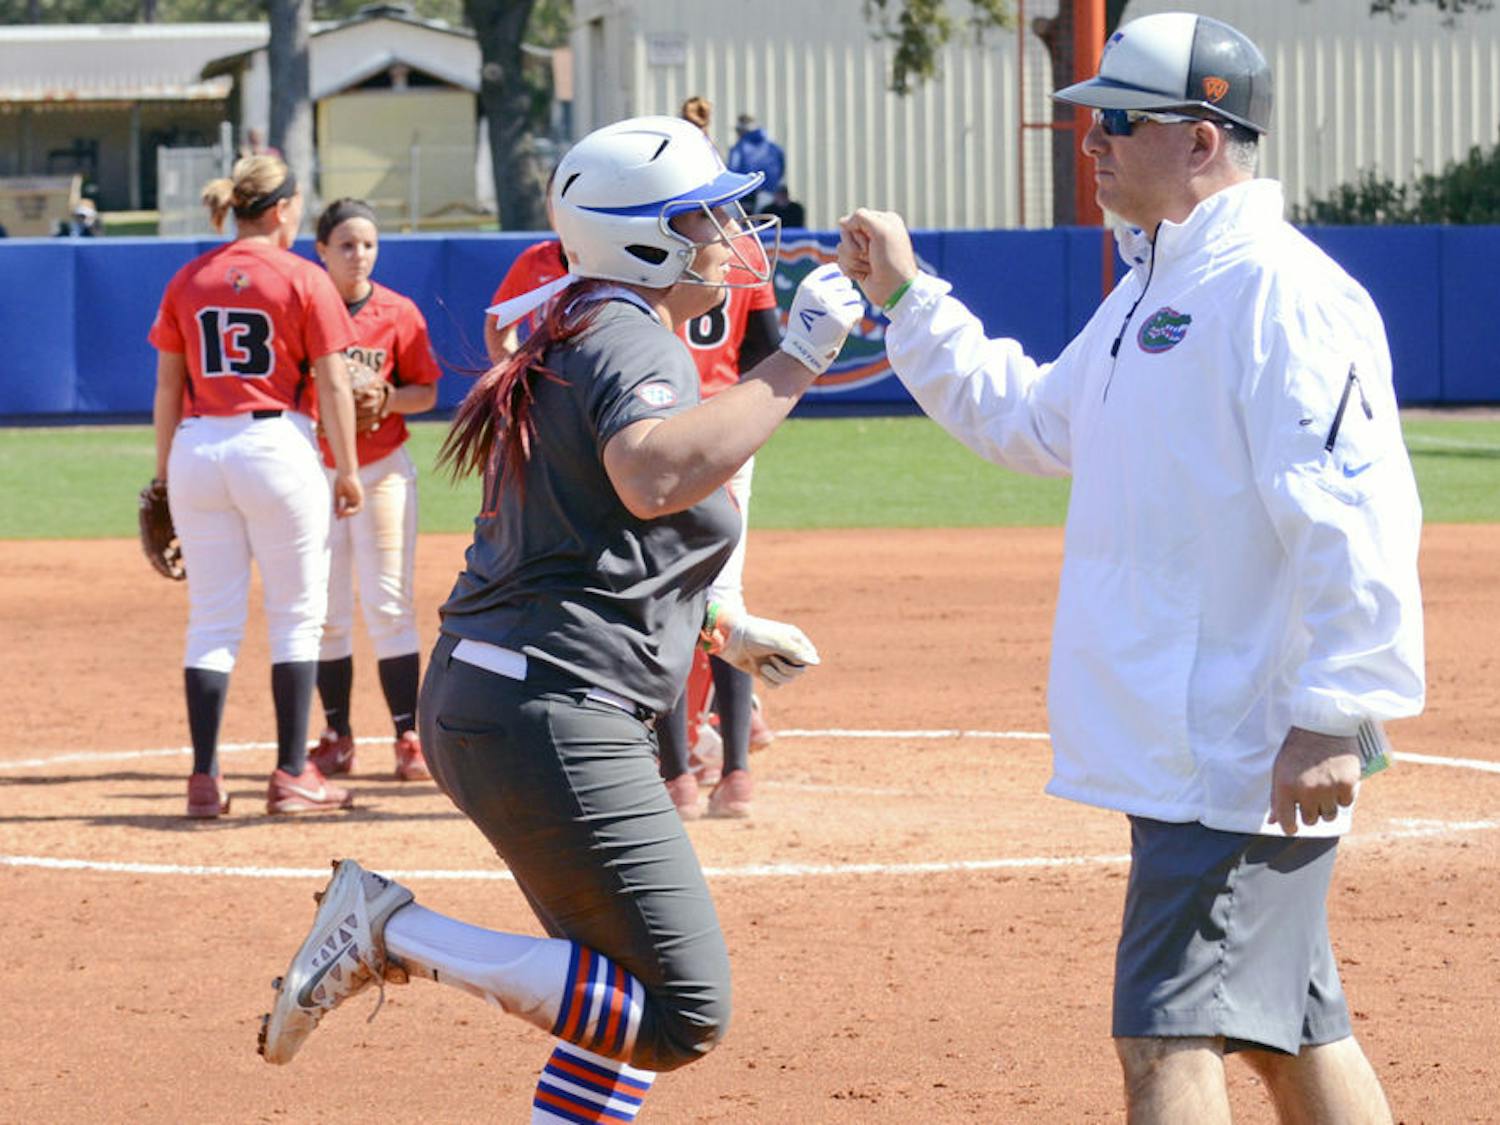 UF's Lauren Haeger fist bumps coach Tim Walton after hitting a home run during Florida's 4-1 win against Illinois State on Feb. 21 at Katie Seashole Pressly Stadium.